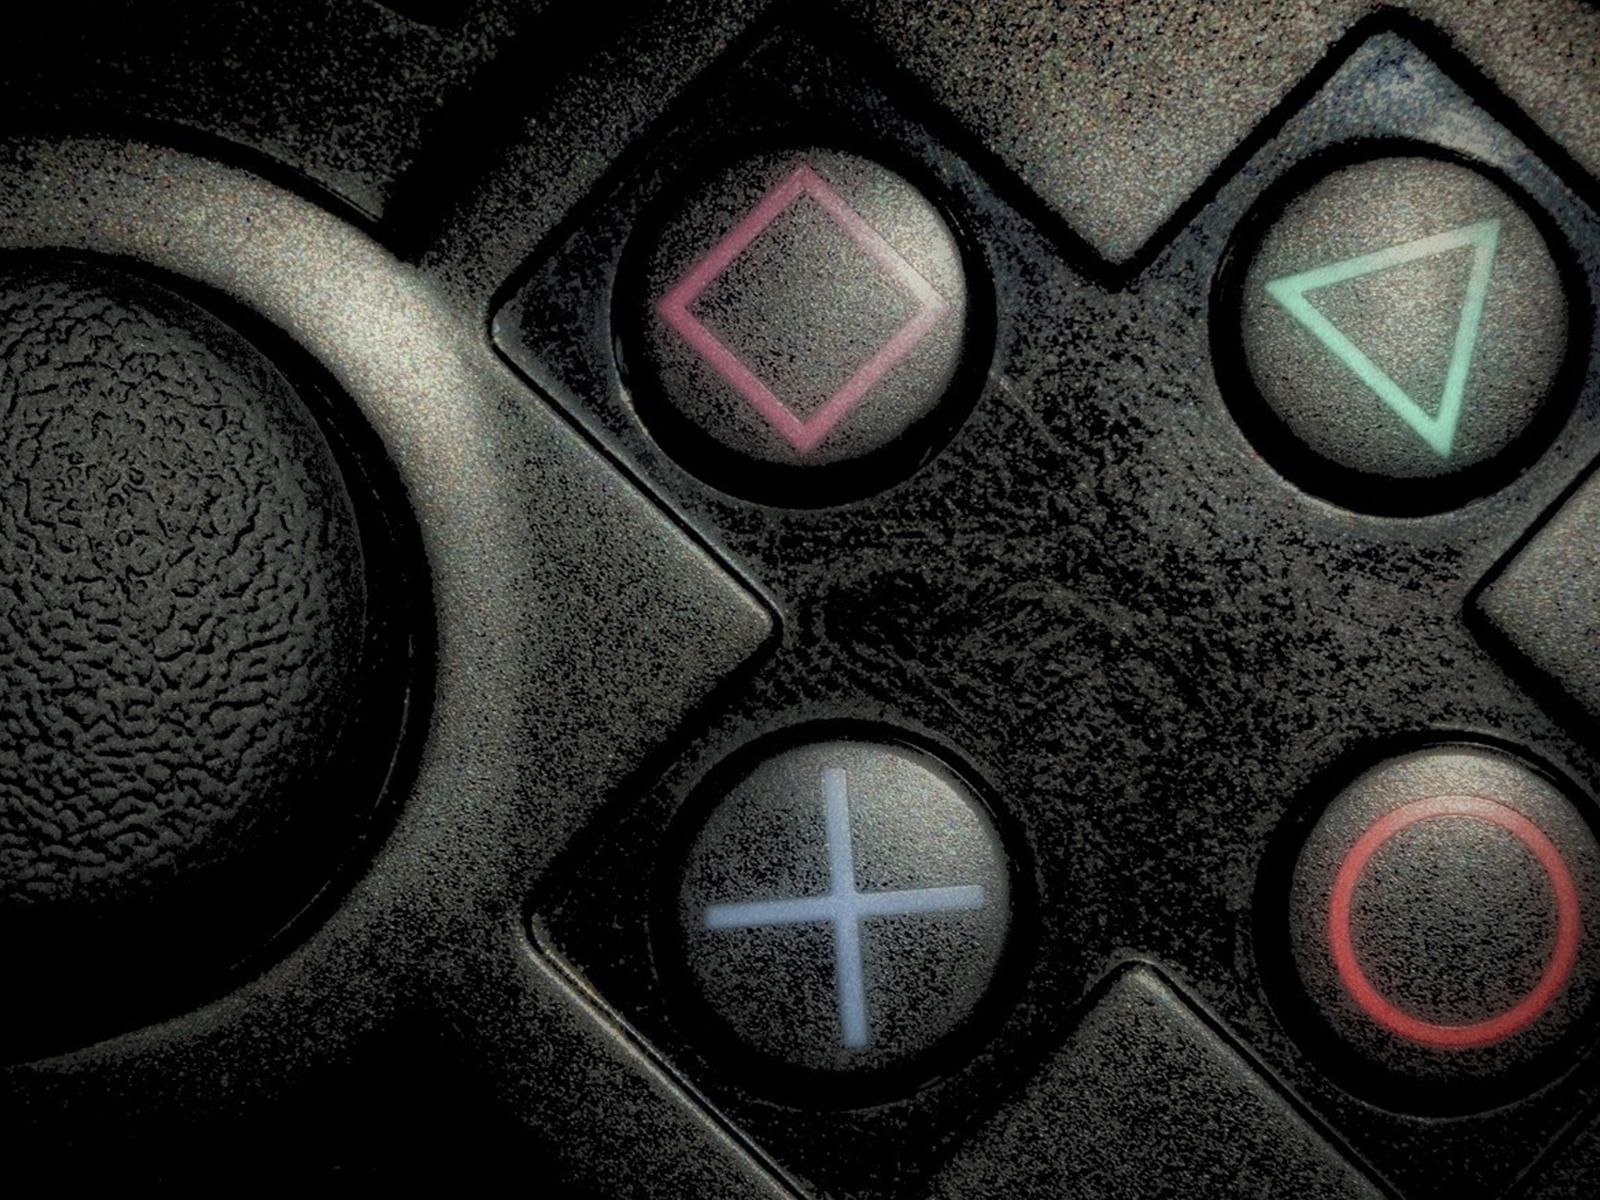 Playstation Buttons for 1600 x 1200 resolution